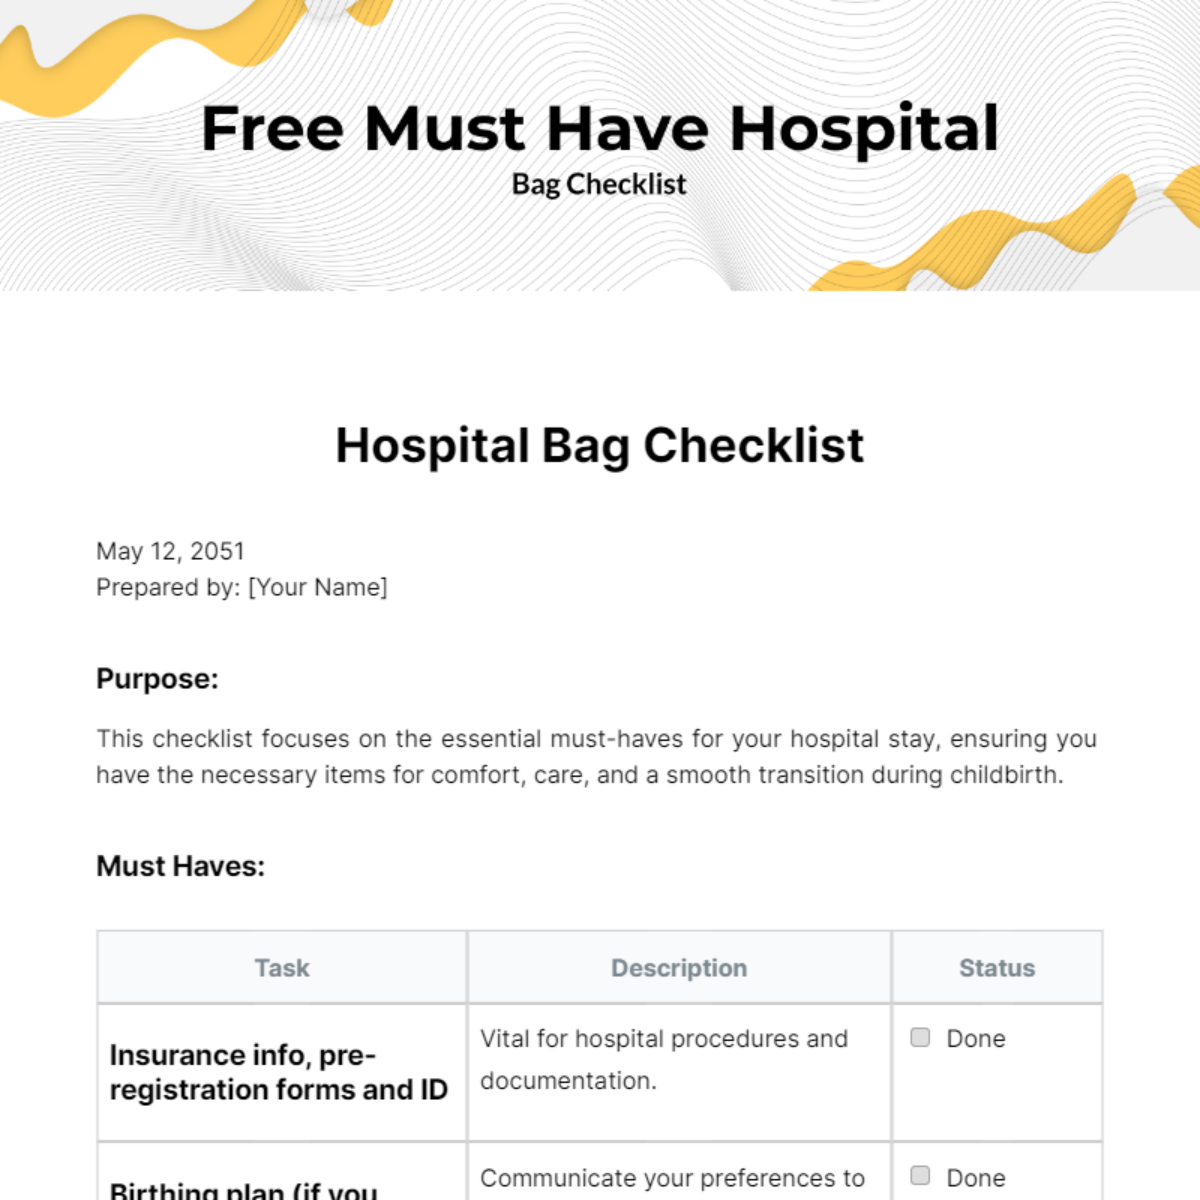 Free Must Have Hospital Bag Checklist Template